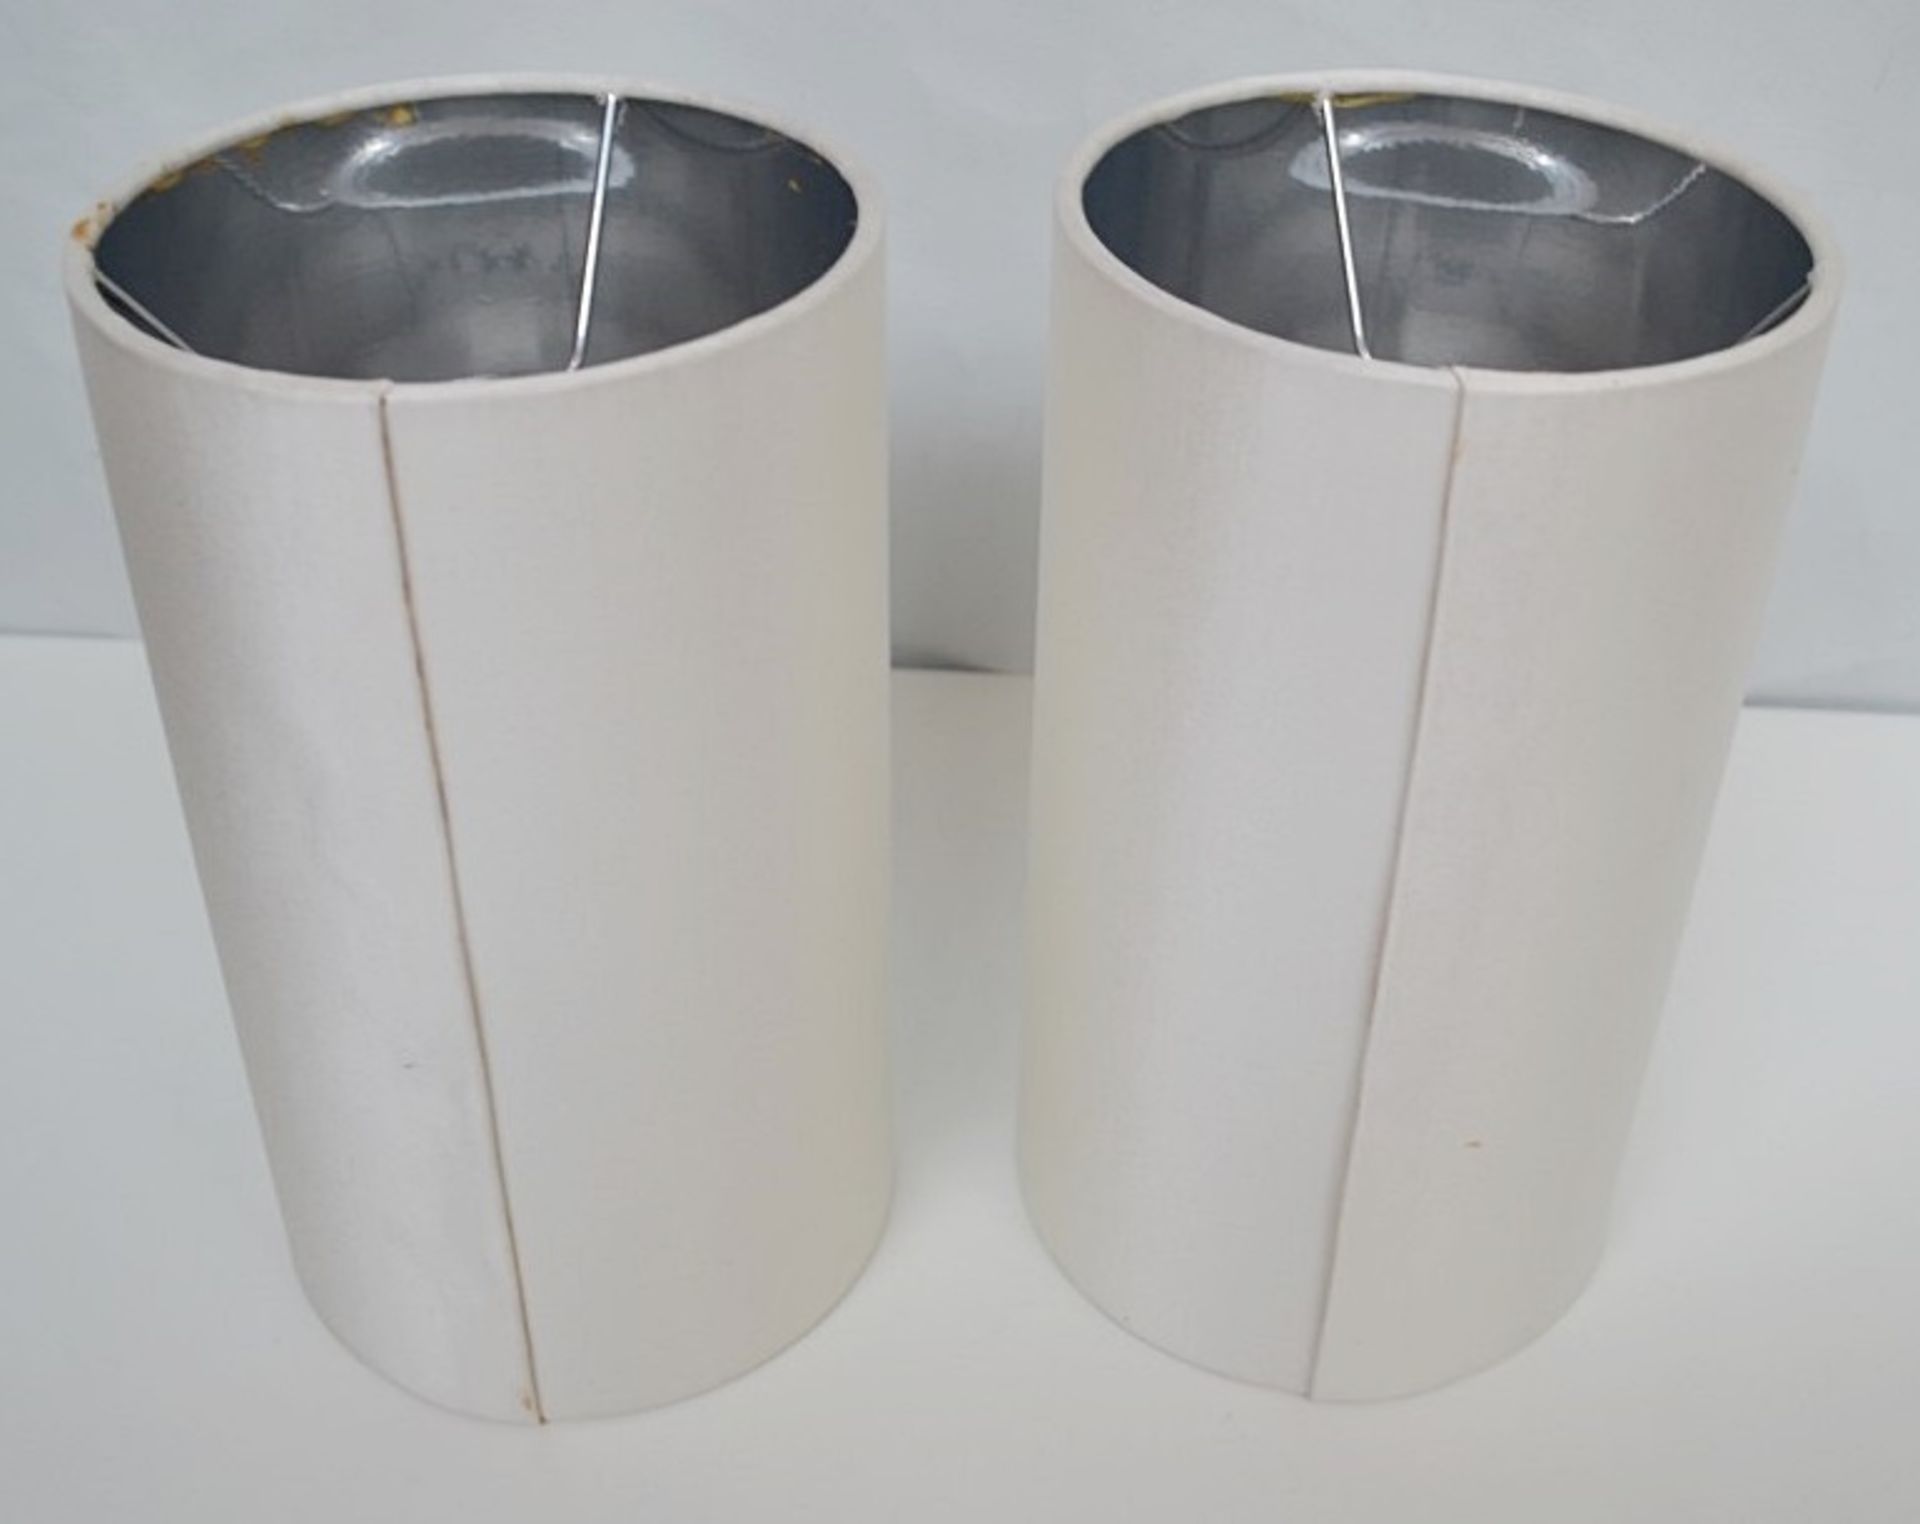 2 x FRATO Sagres Lamp Shades In A Silver Silk Covering - Dimensions: Height 27cm, Diameter 15. - Image 2 of 6